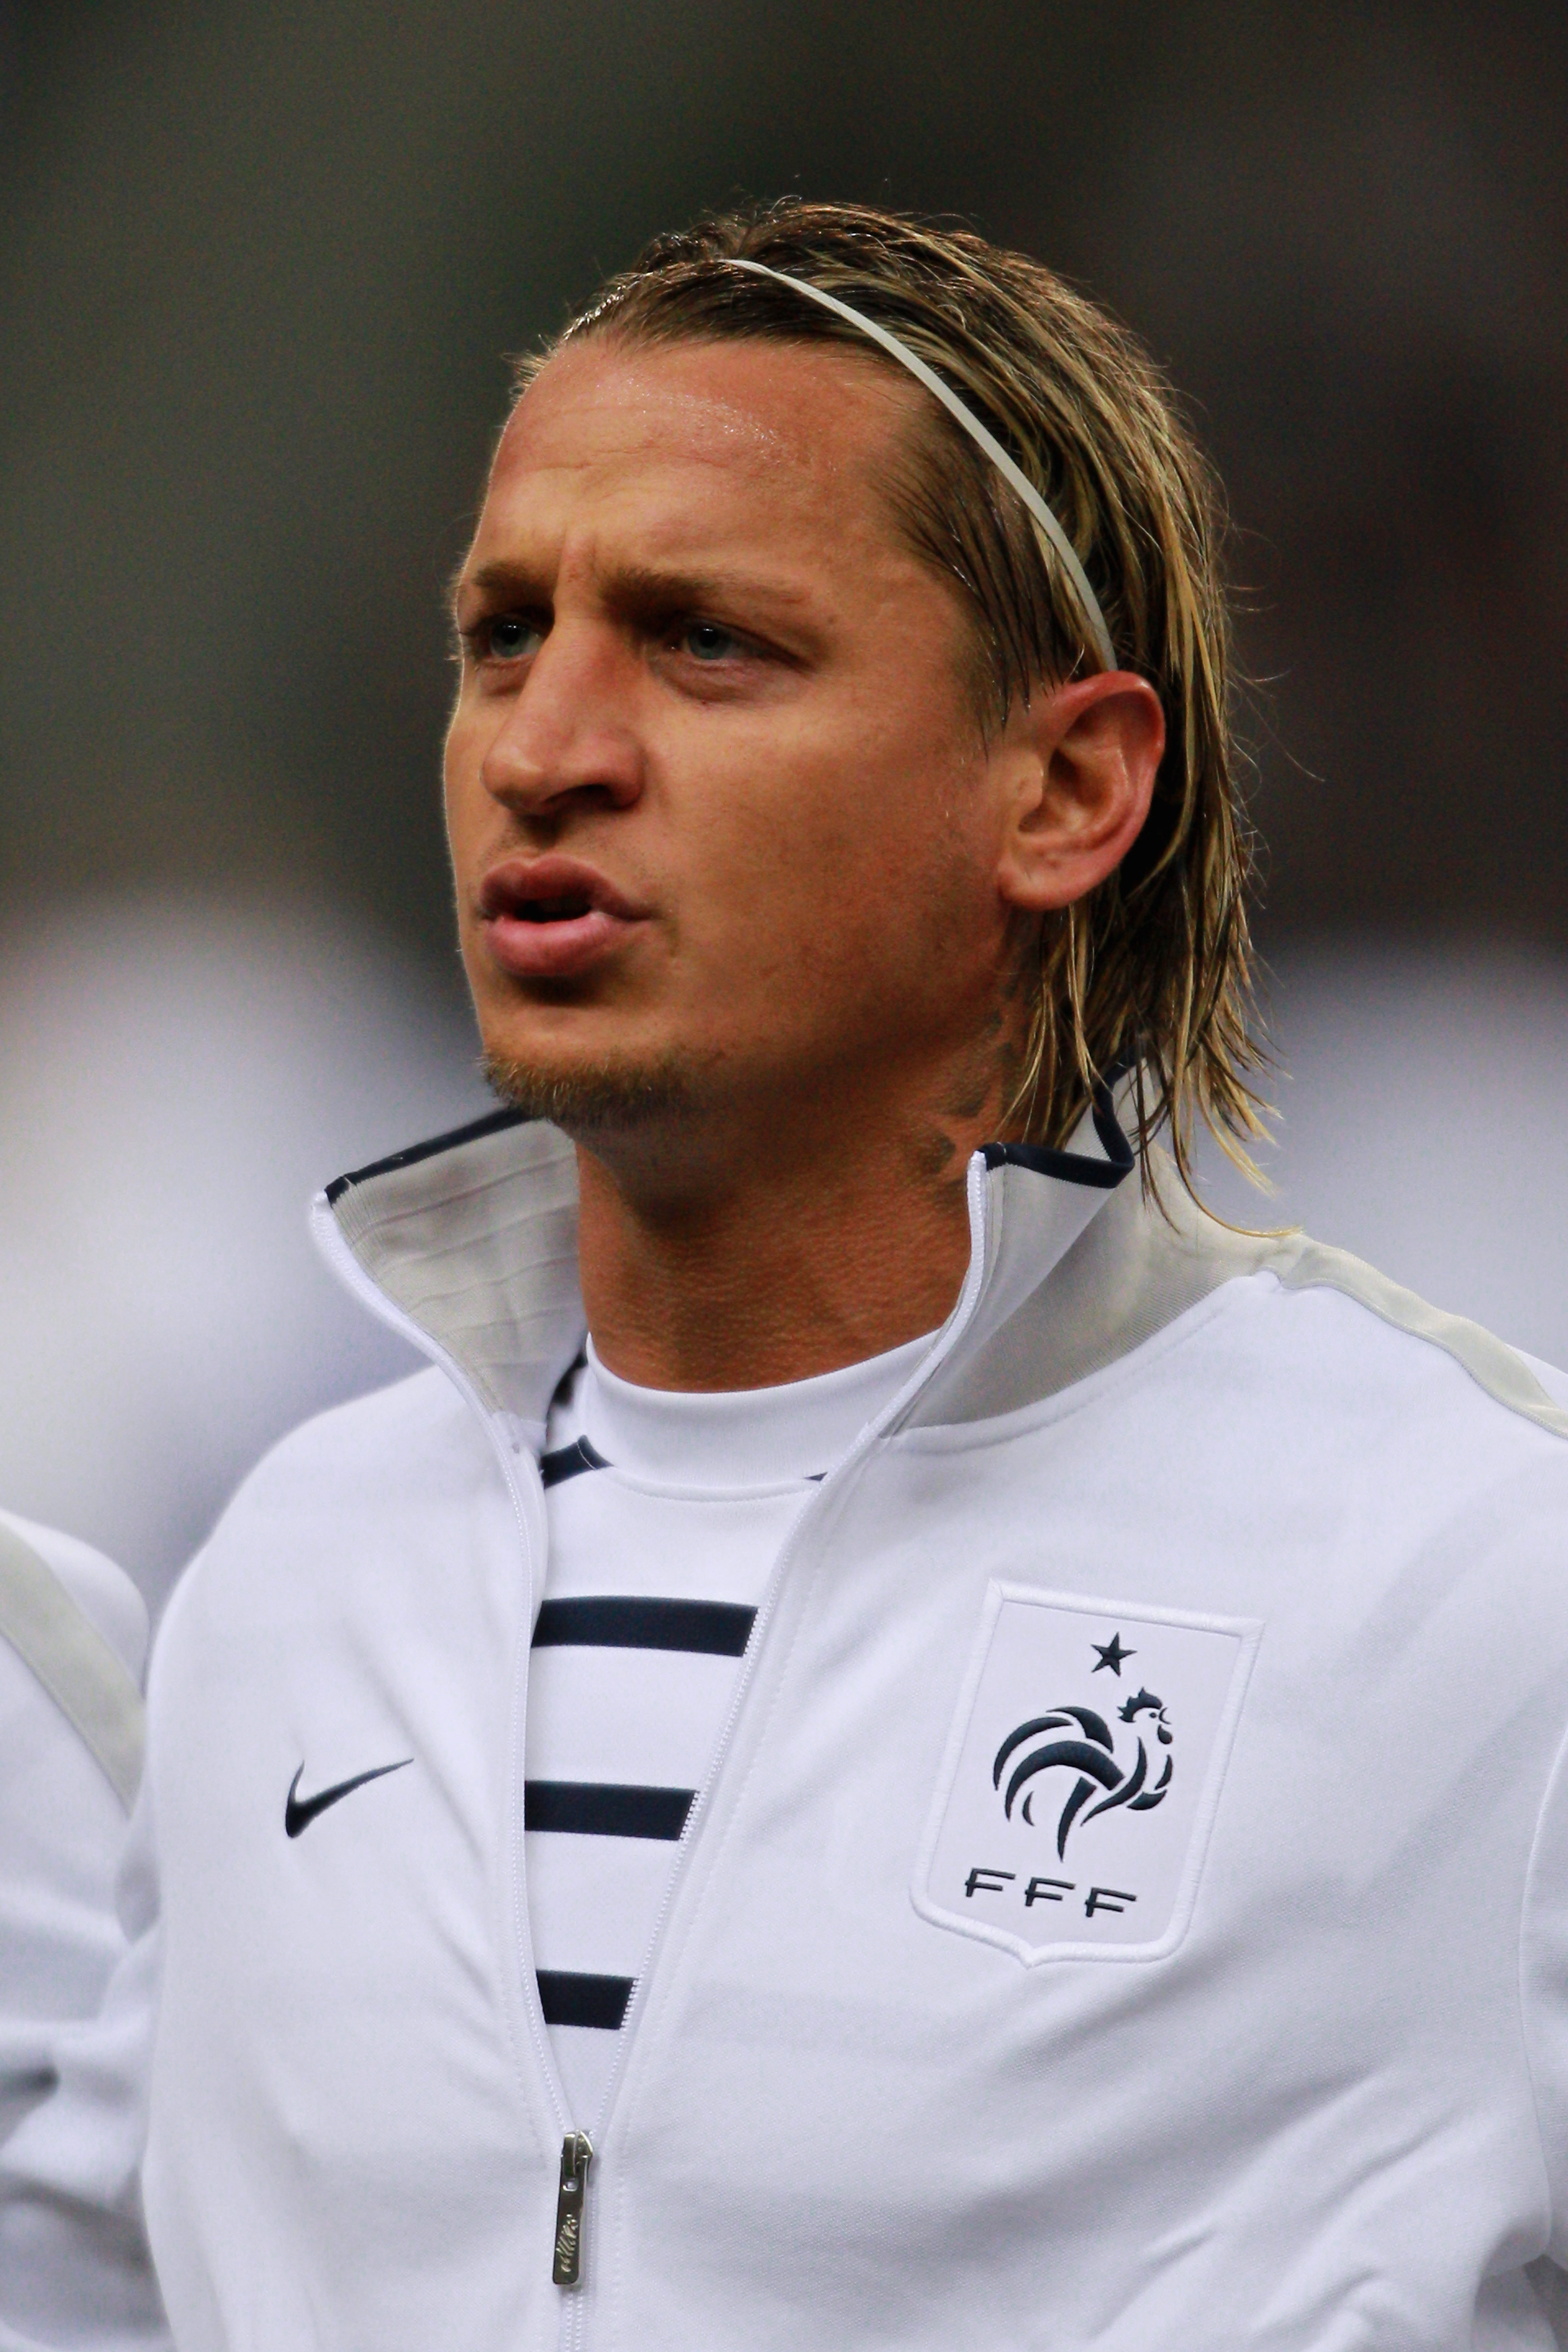 PARIS, FRANCE - MARCH 29:  Philippe Mexes of France sings the national anthem during the International friendly match between France and Croatia at Stade de France on March 29, 2011 in Paris, France.  (Photo by Dean Mouhtaropoulos/Getty Images)